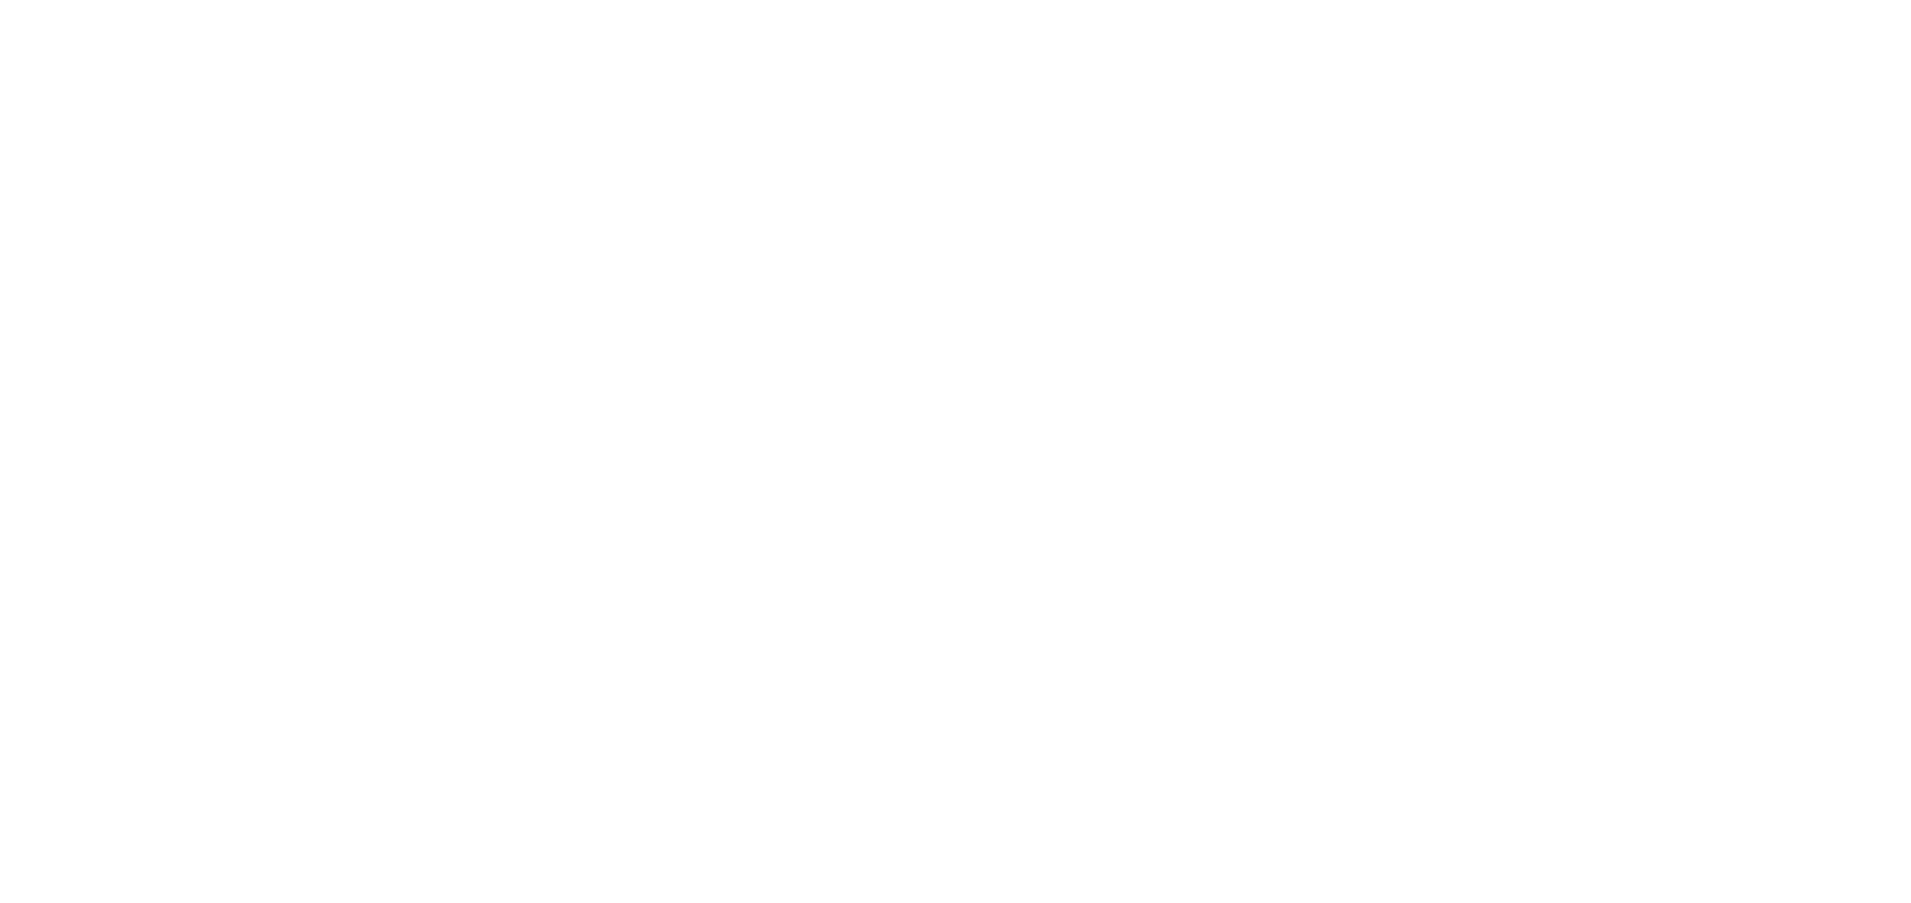 Humanity First Orphan Care logo